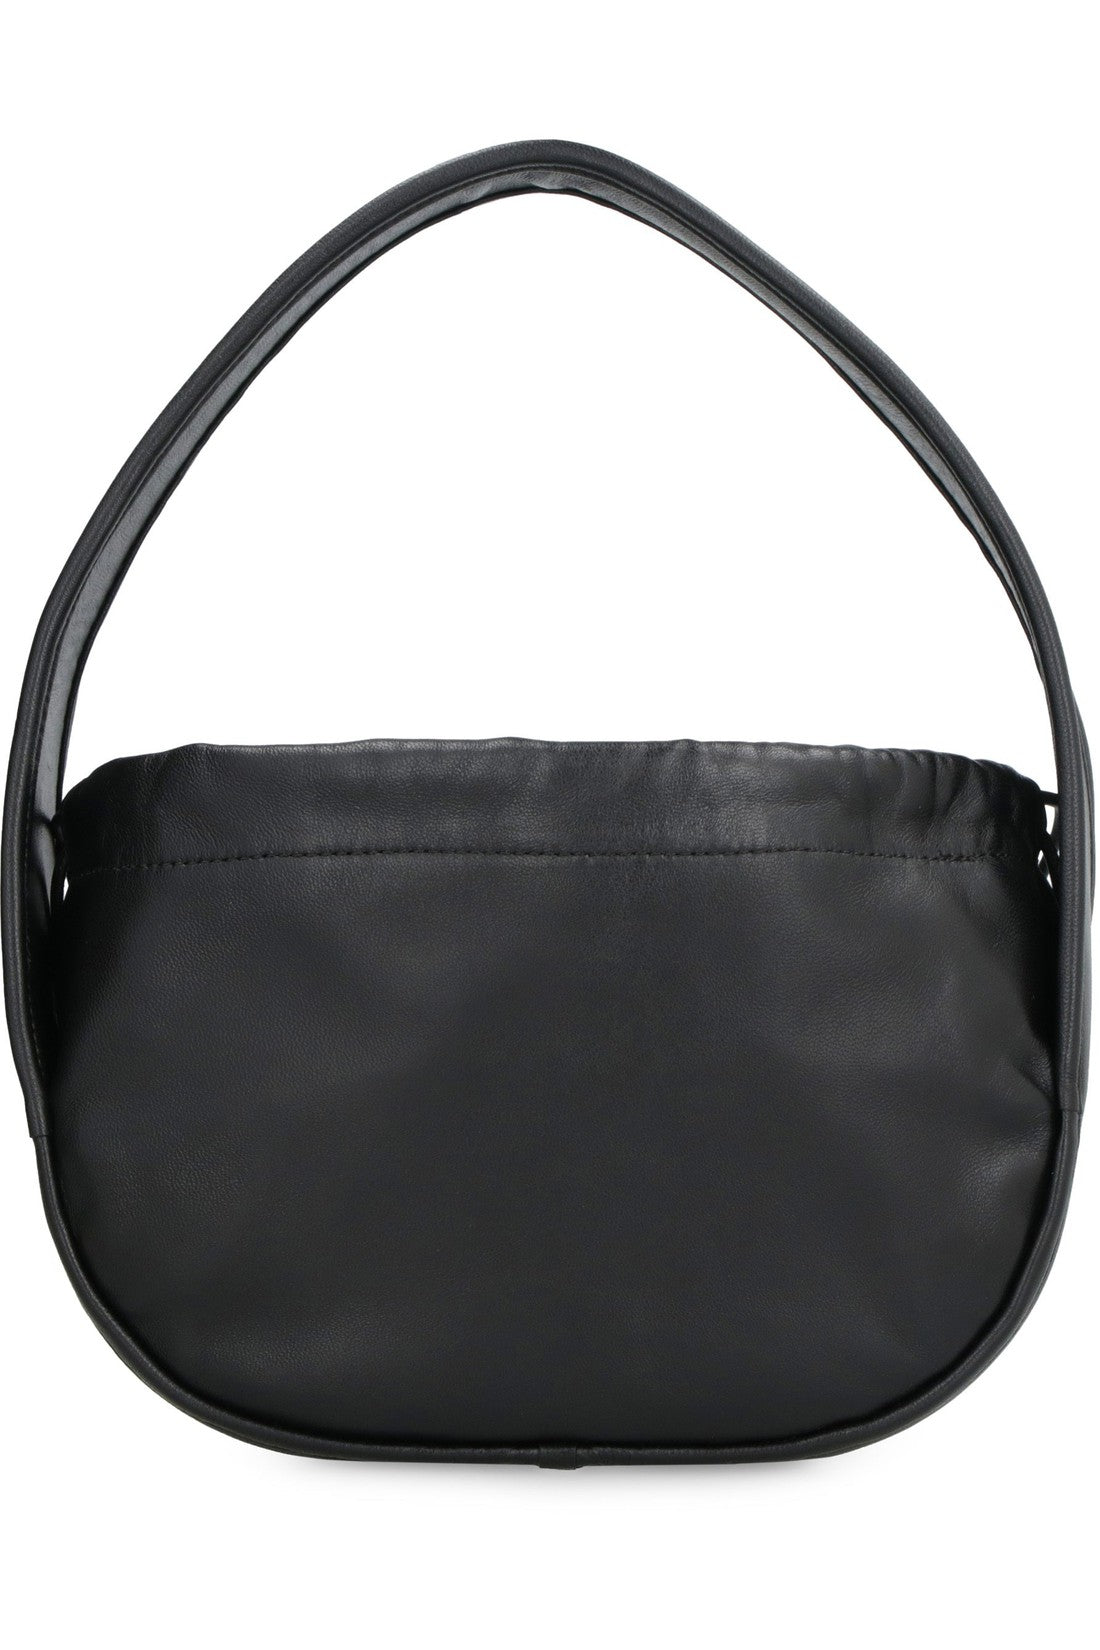 Alexander Wang-OUTLET-SALE-Cinch leather small hobo bag-ARCHIVIST